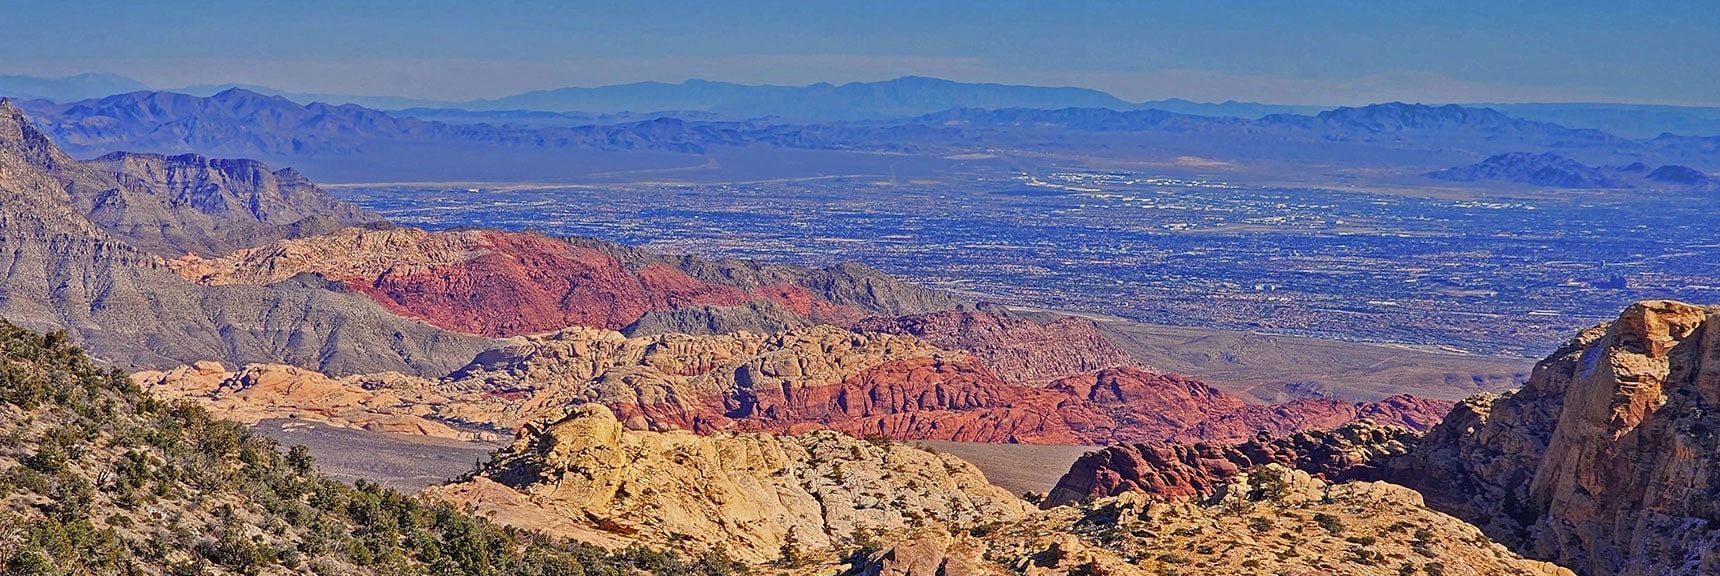 Red Rock Canyon, Las Vegas Valley and the Mountains Beyond | Mid Upper Crest Ridgeline | Rainbow Mountain Wilderness, Nevada